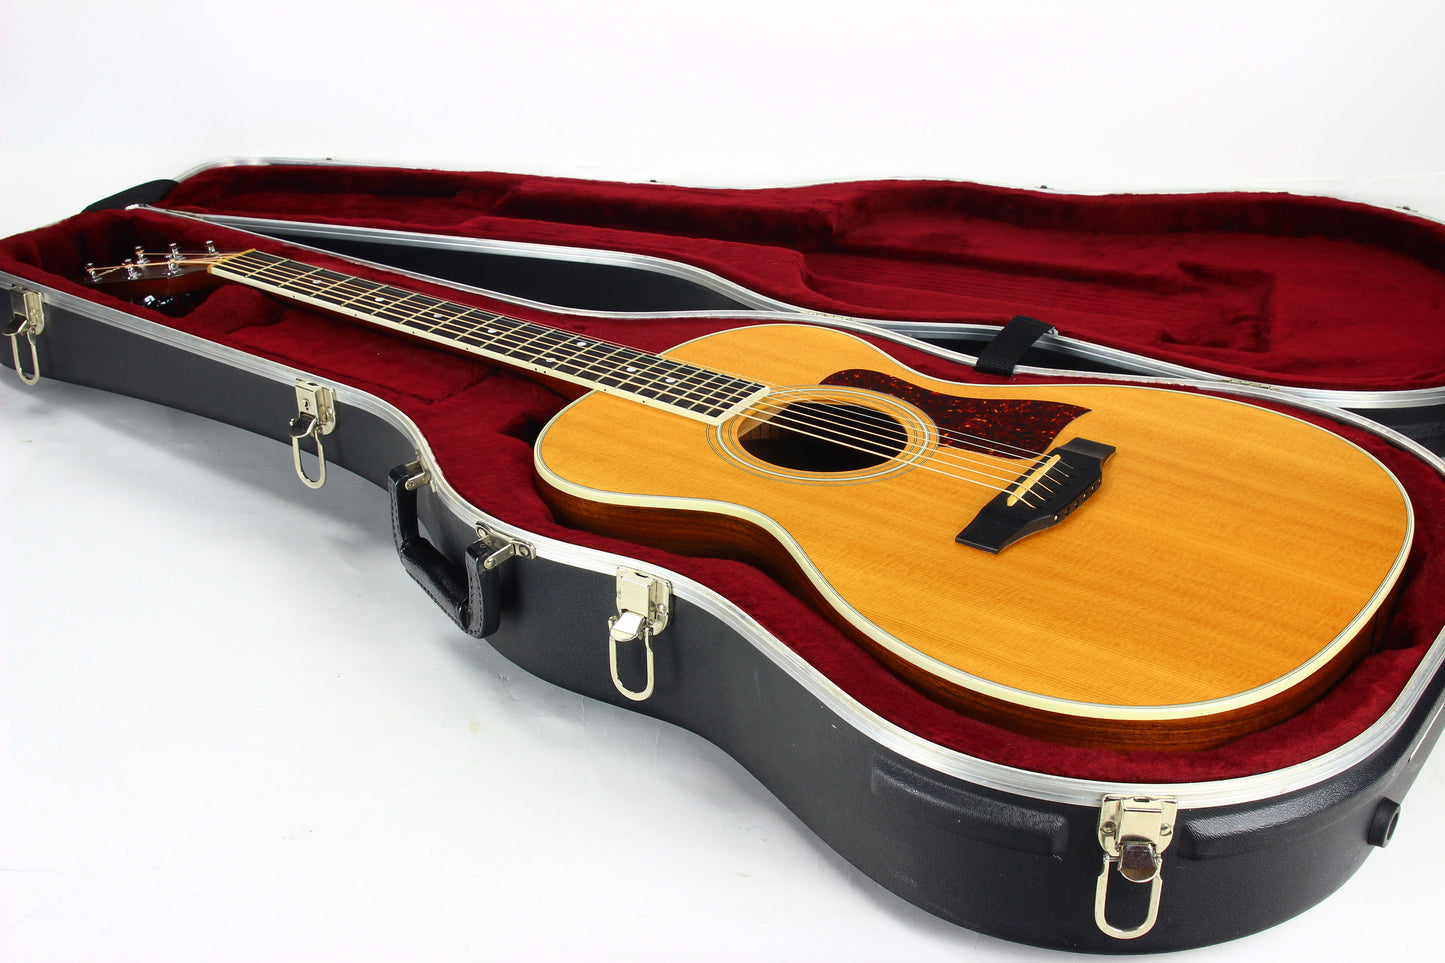 1997 Taylor 422 Rosewood Grand Concert Small Body Acoustic Guitar w/ Original Hard Case! 412 312